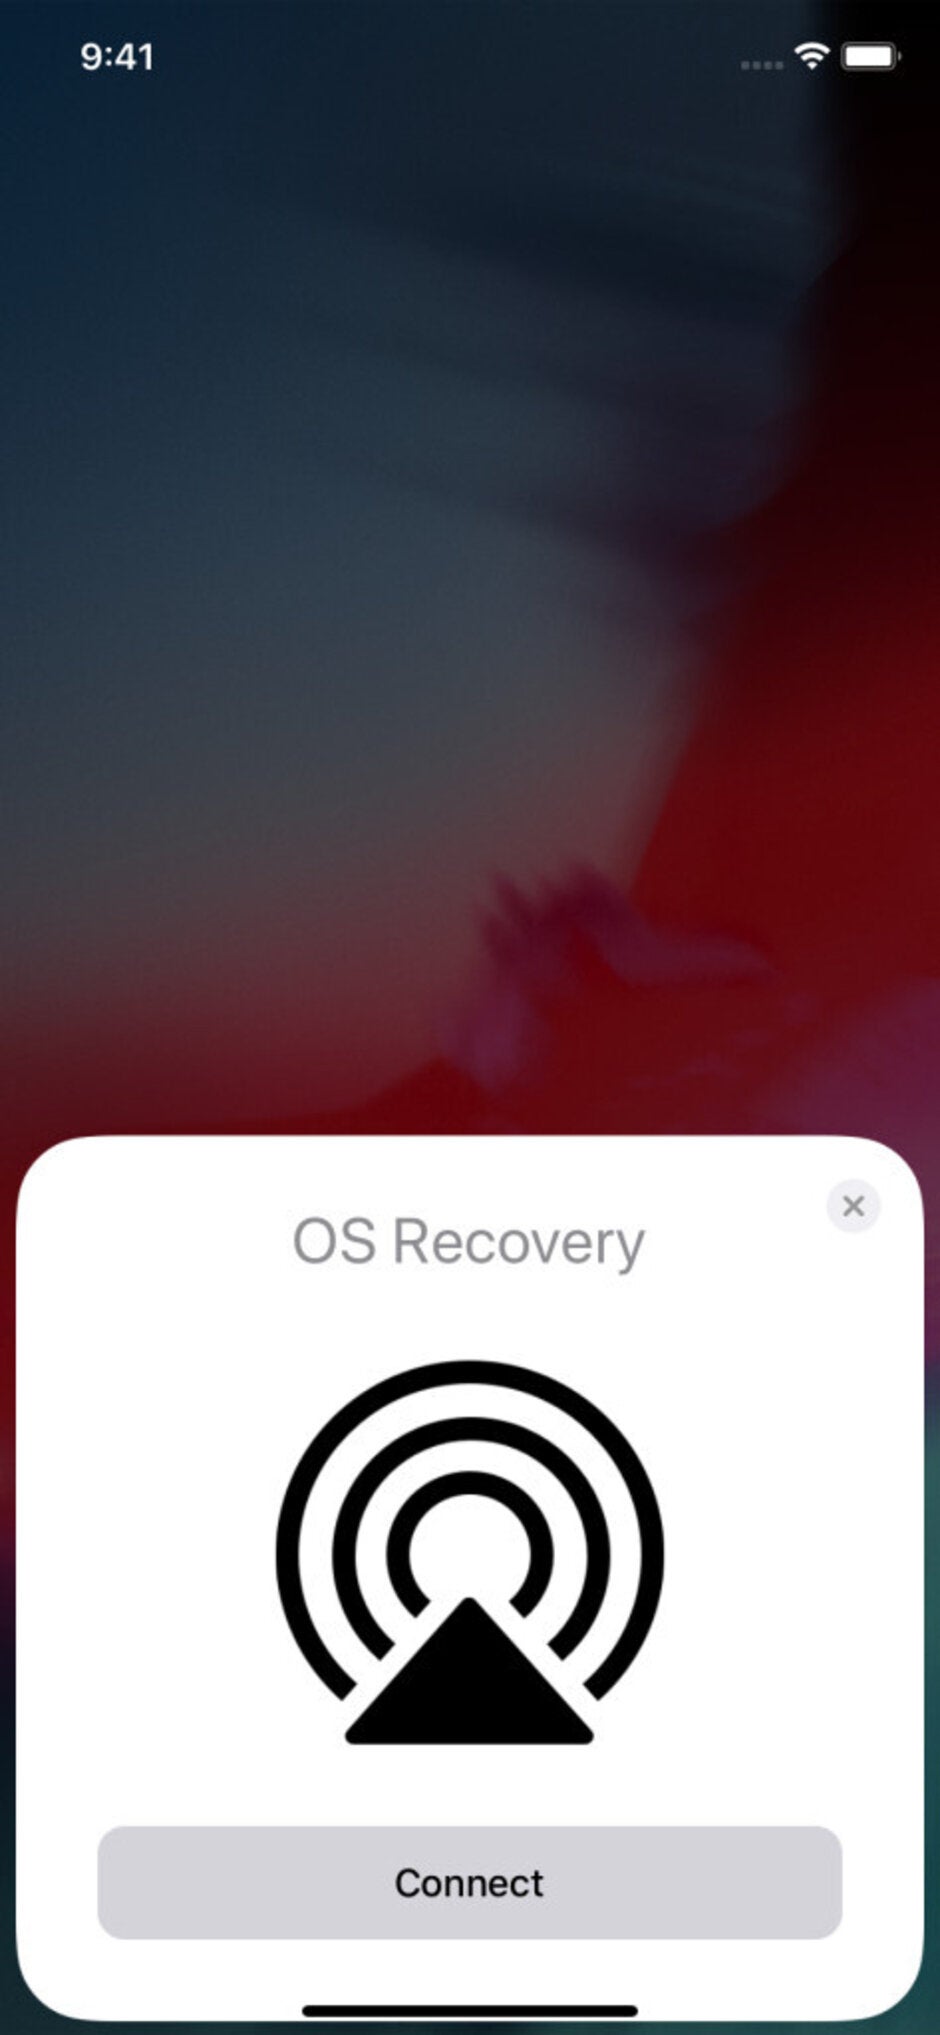 iOS 13.4 preview: internet recovery, Mail app redesign and others